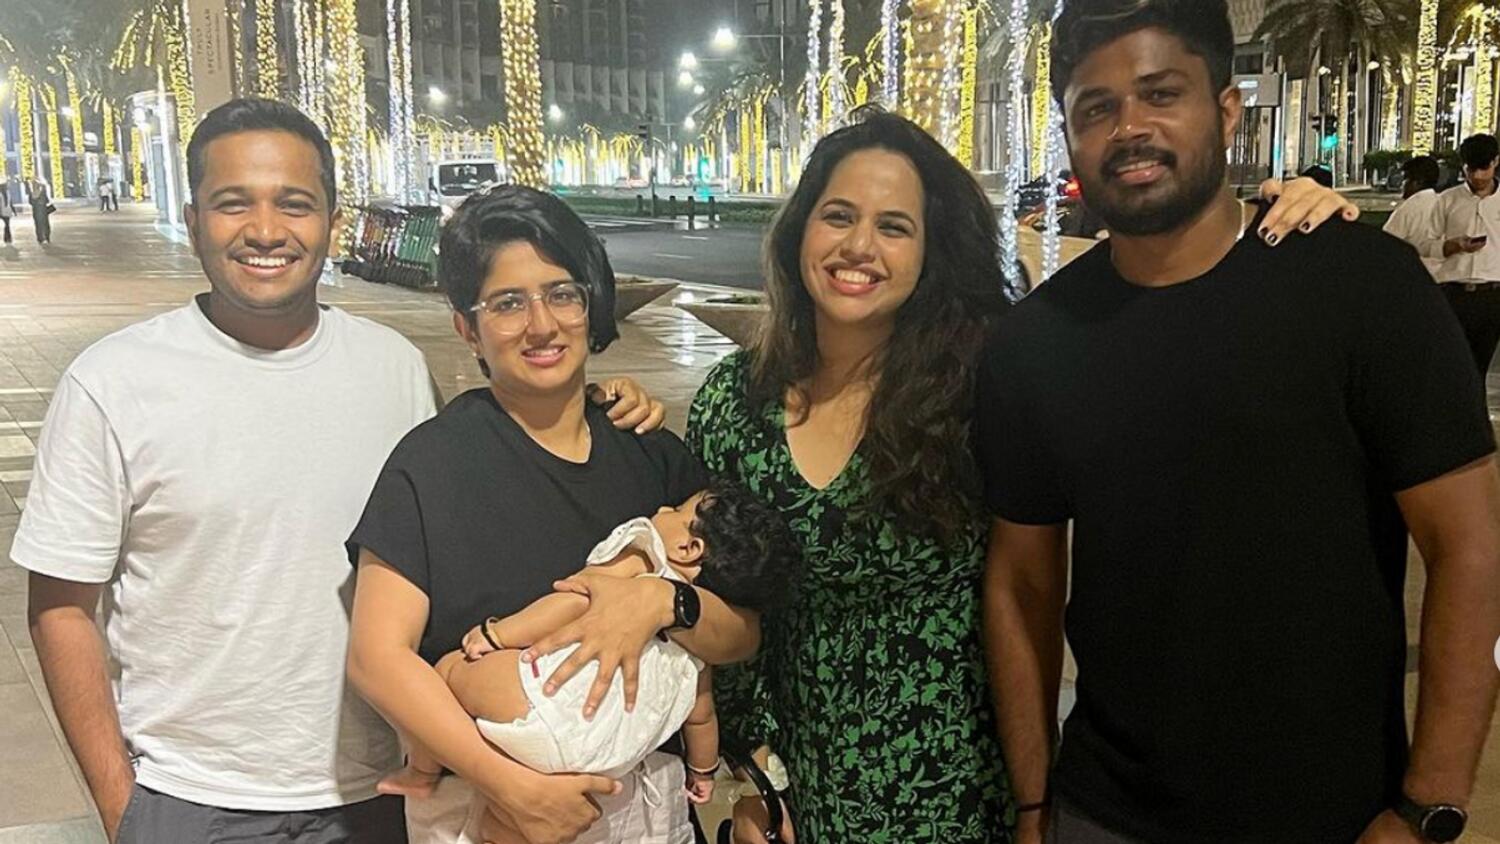 Basil Joseph and family with Sanju Samson and his wife. — Photo courtesy: Instagram